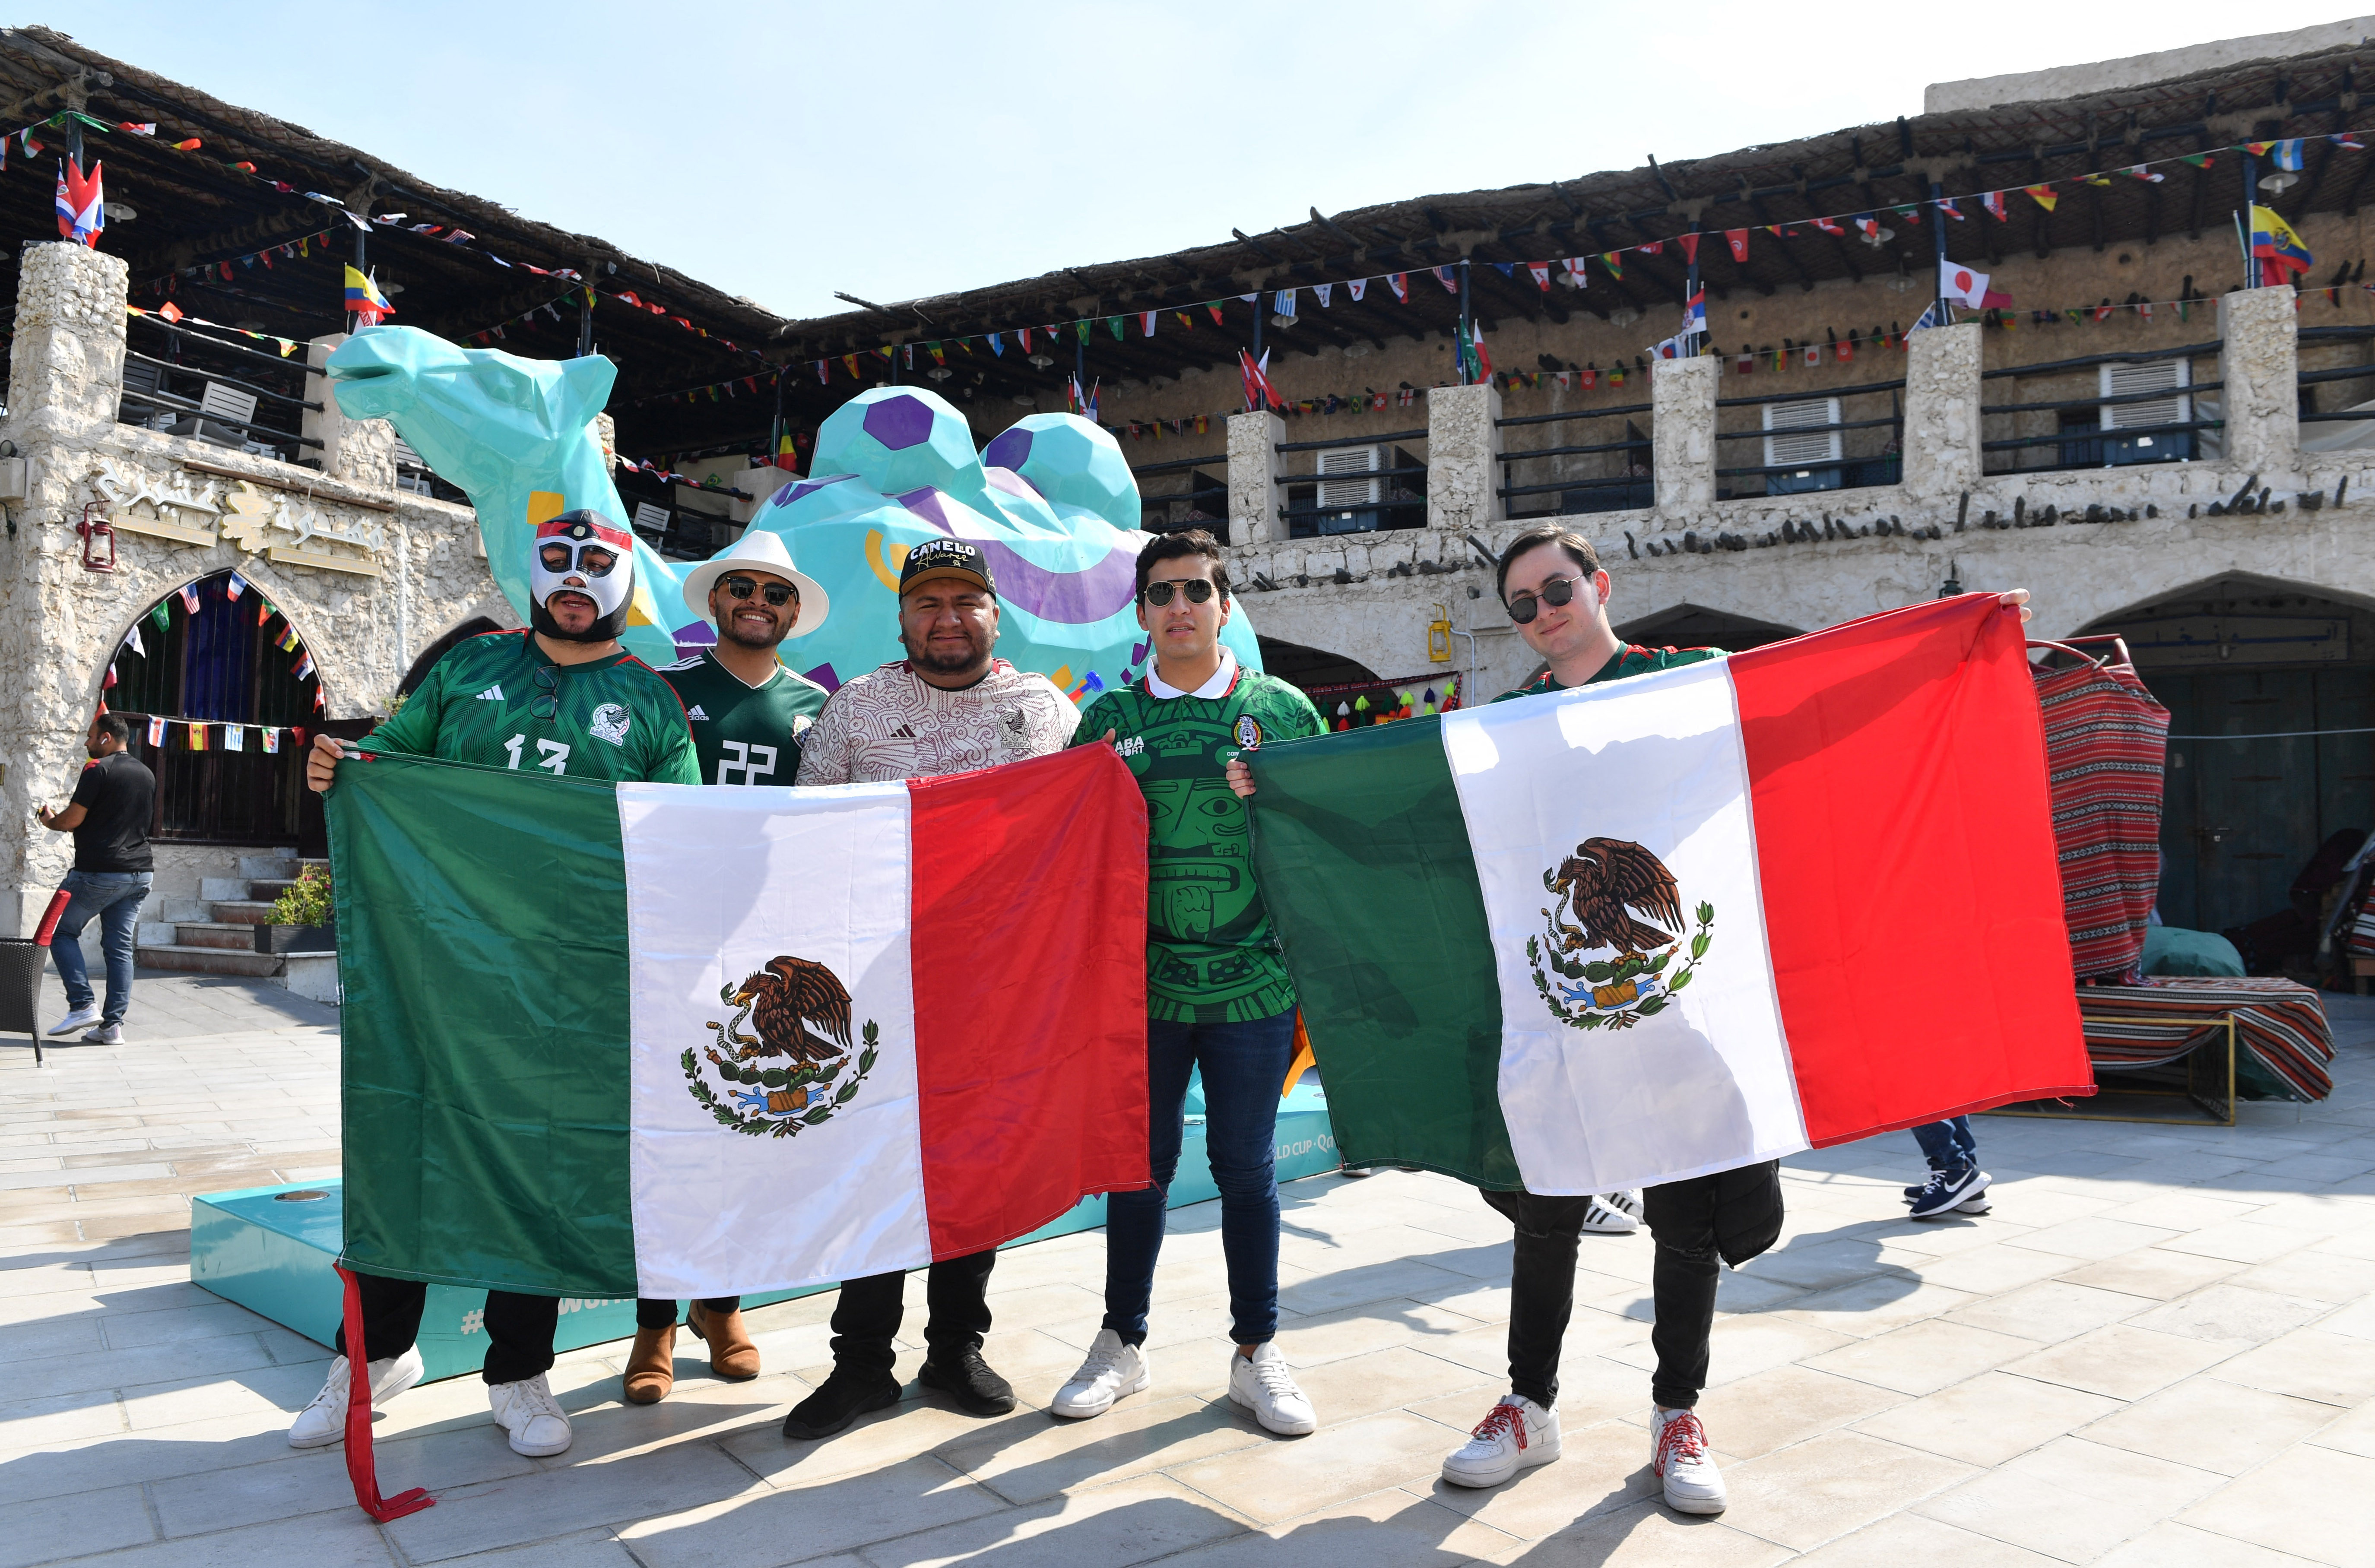 The Ministry of Foreign Affairs has calculated that around 100,000 Mexican fans will attend Qatar 2022. REUTERS/Jennifer Lorenzini